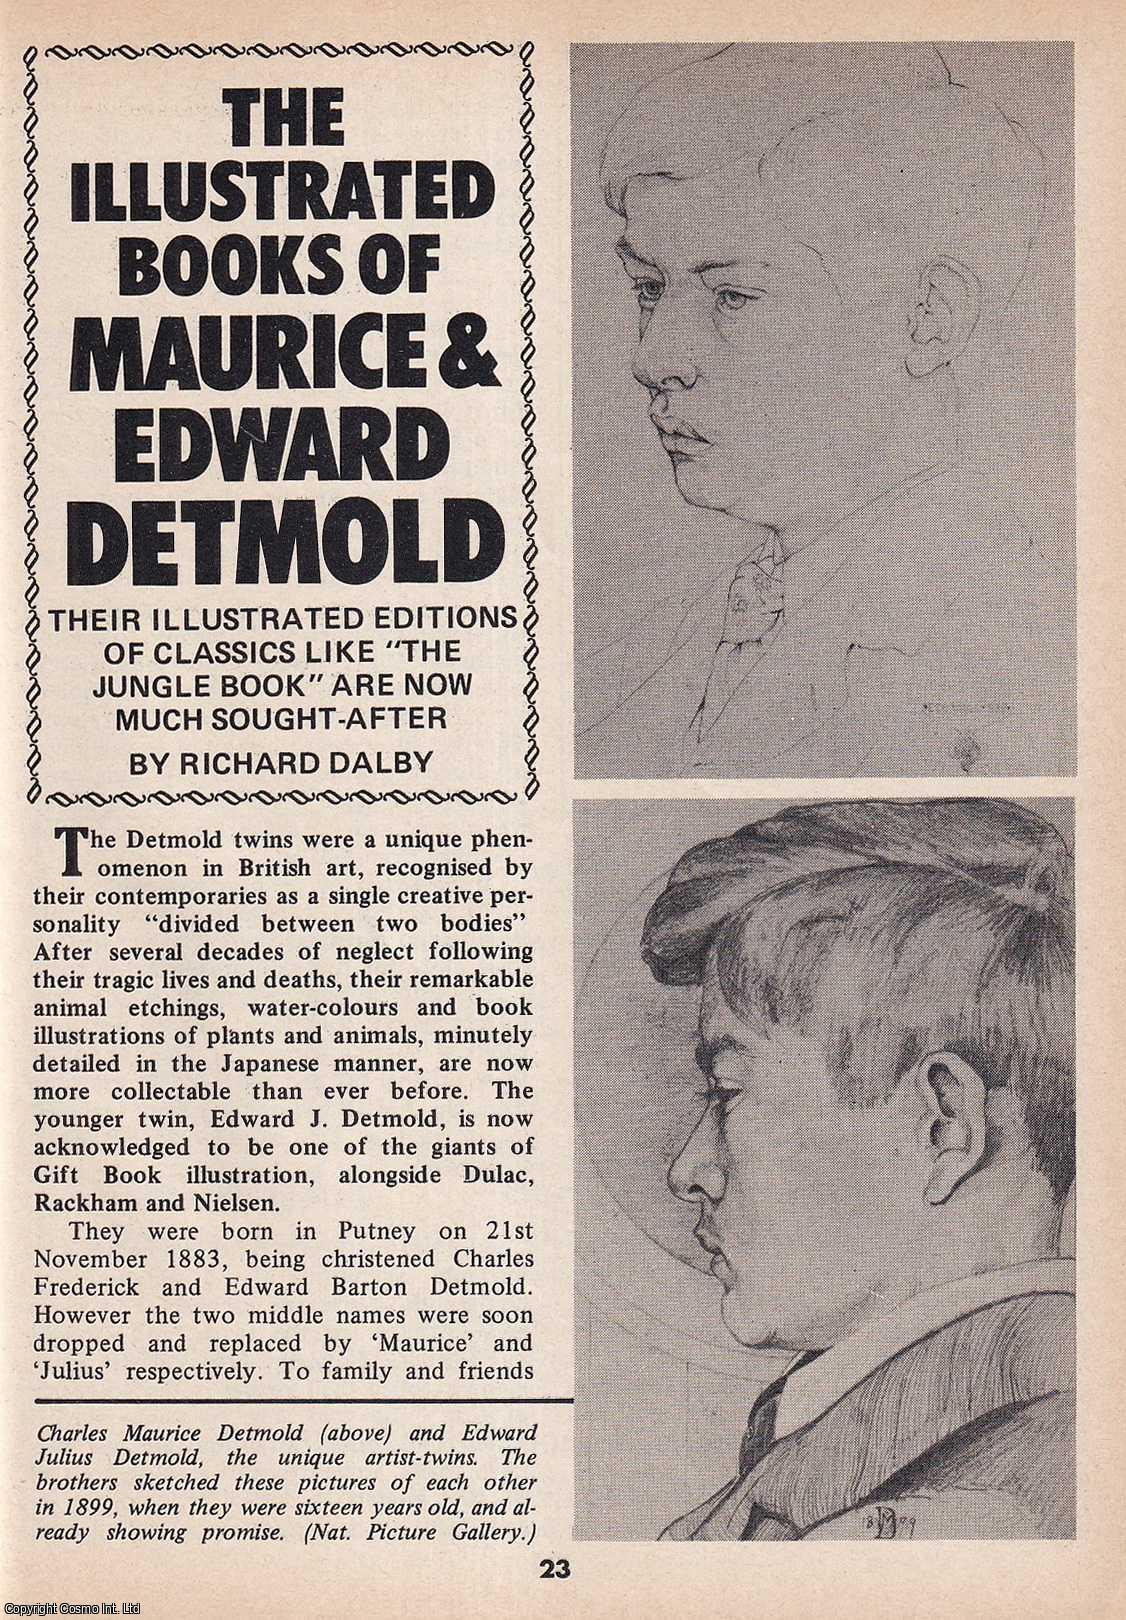 Richard Dalby - The Illustrated Books of Maurice and Edward Detmold. This is an original article separated from an issue of The Book & Magazine Collector publication.